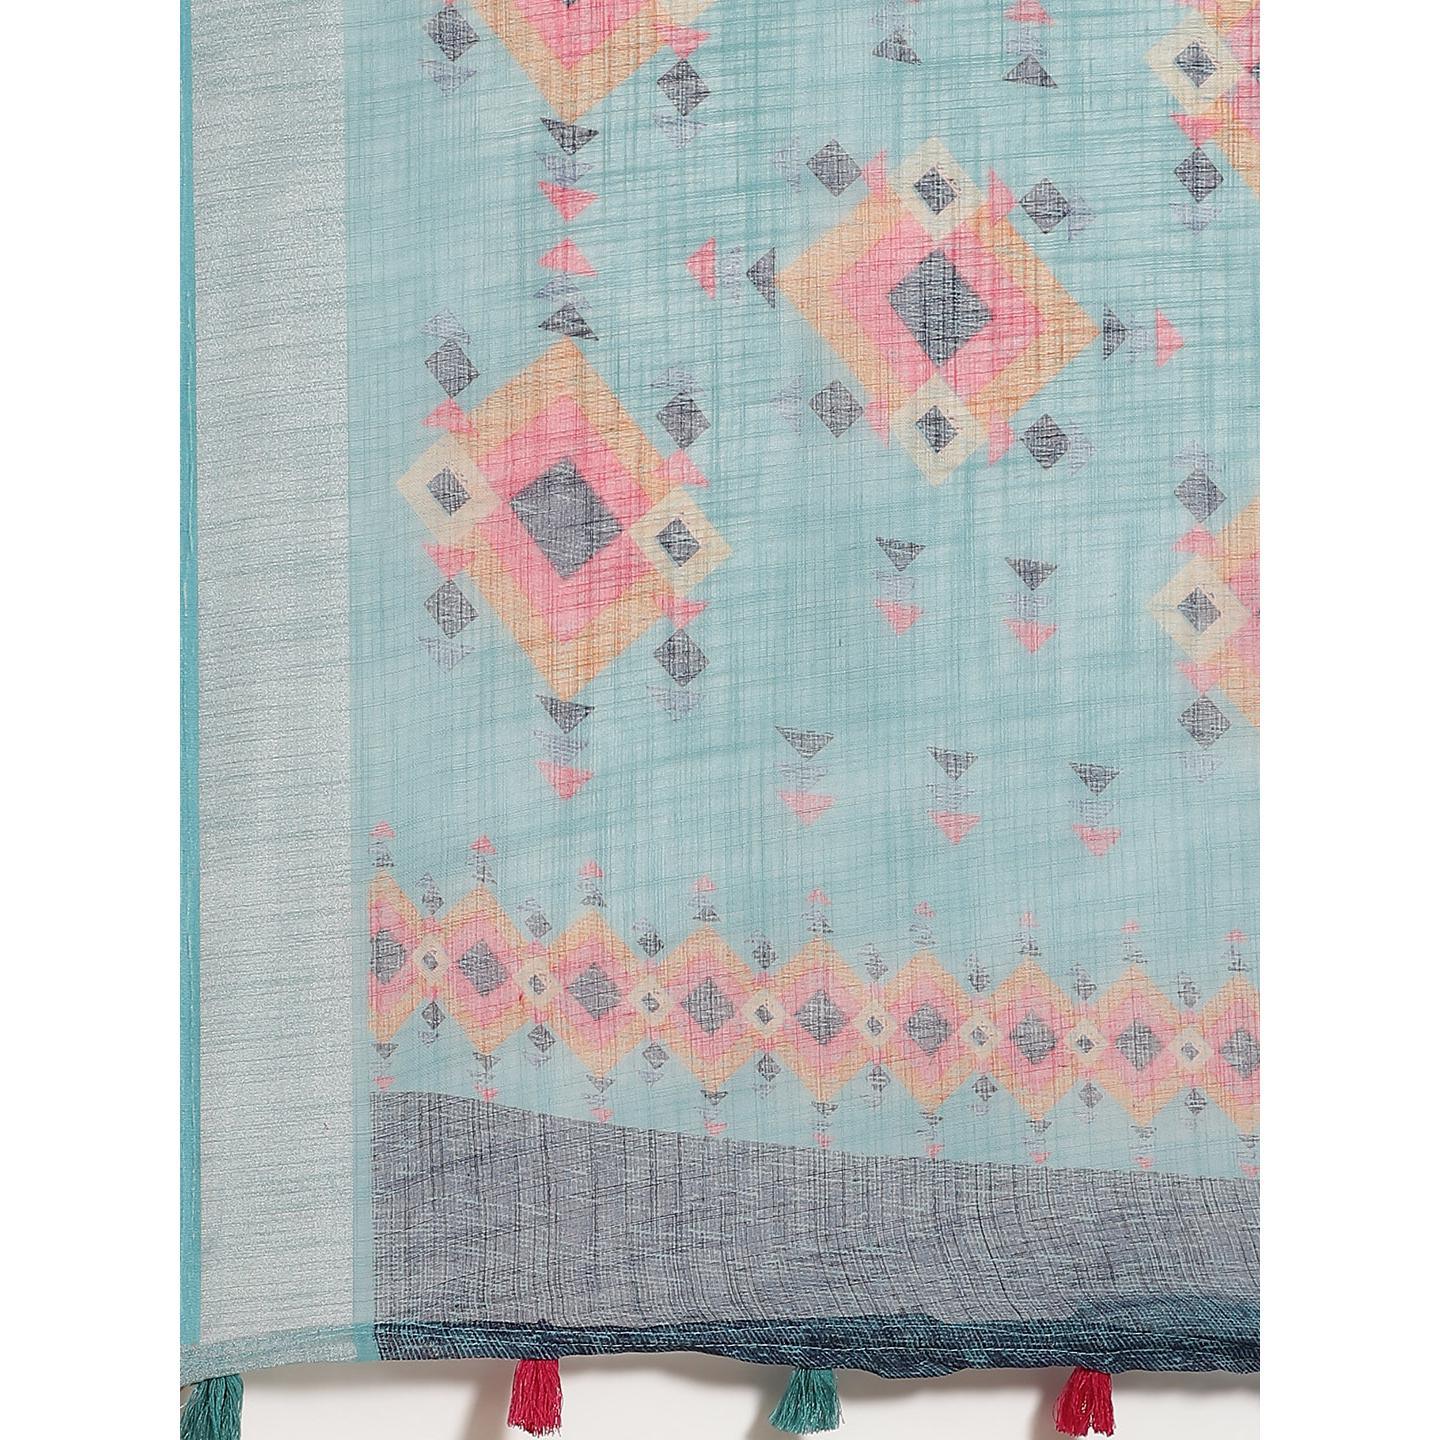 Energetic Teal Blue Colored Casual Wear Printed Linen Saree - Peachmode